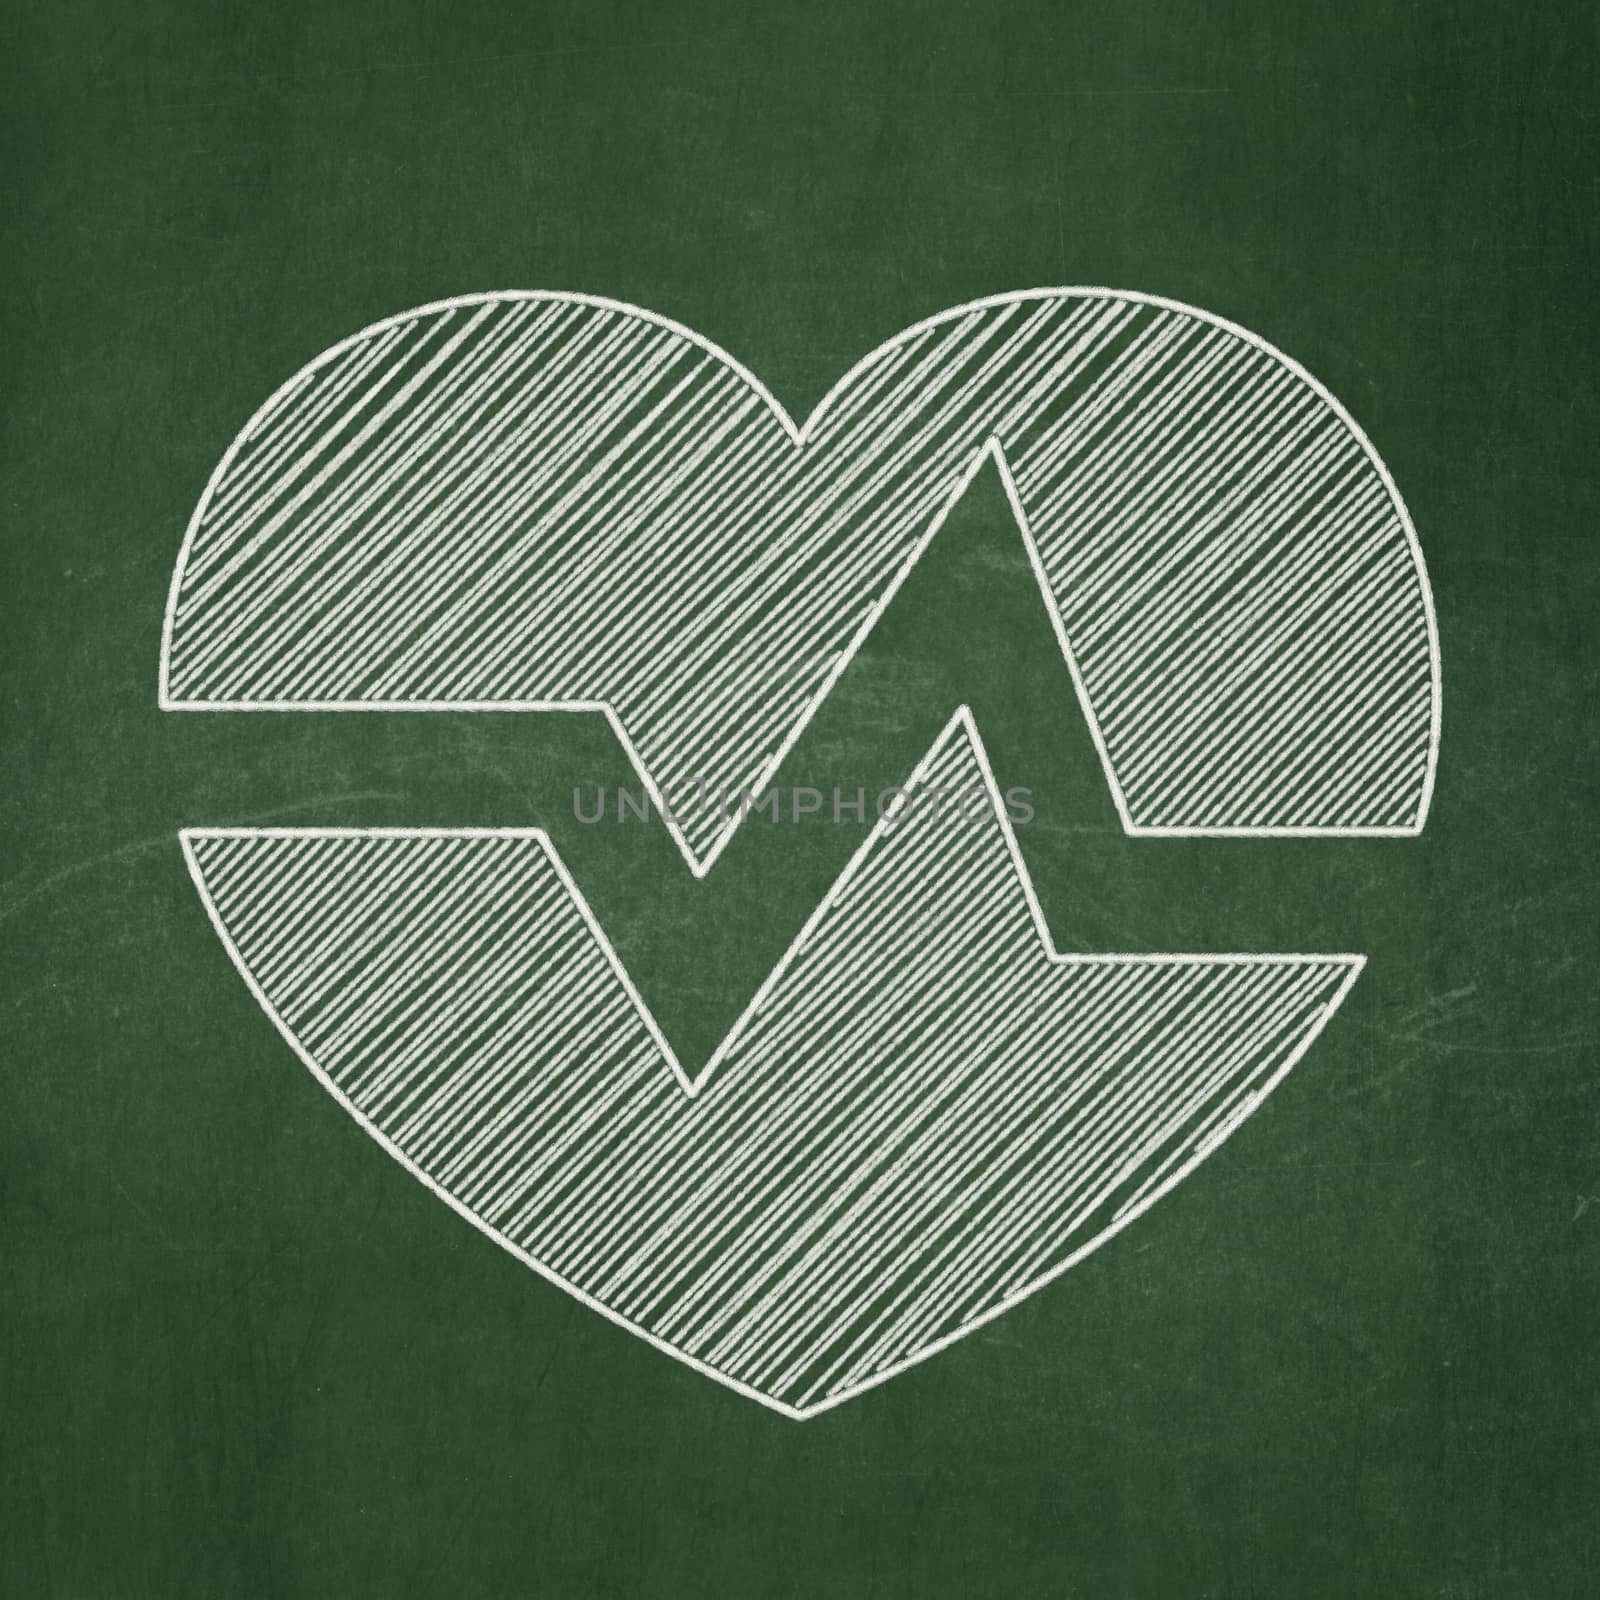 Healthcare concept: Heart icon on Green chalkboard background